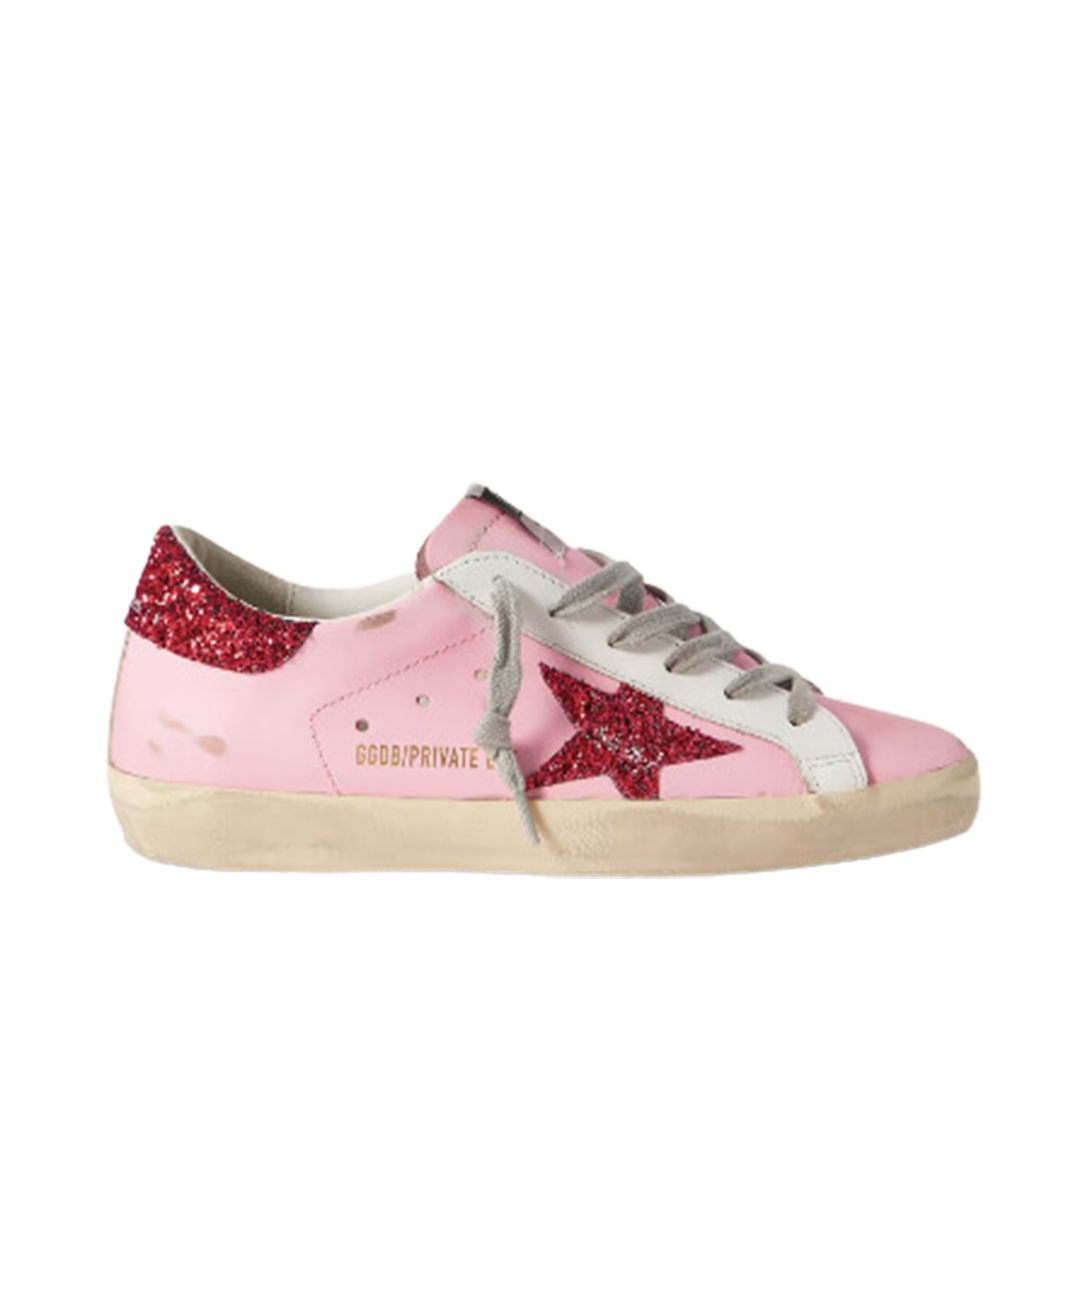 Golden Goose + Superstar Glittered Distressed Leather Sneakers